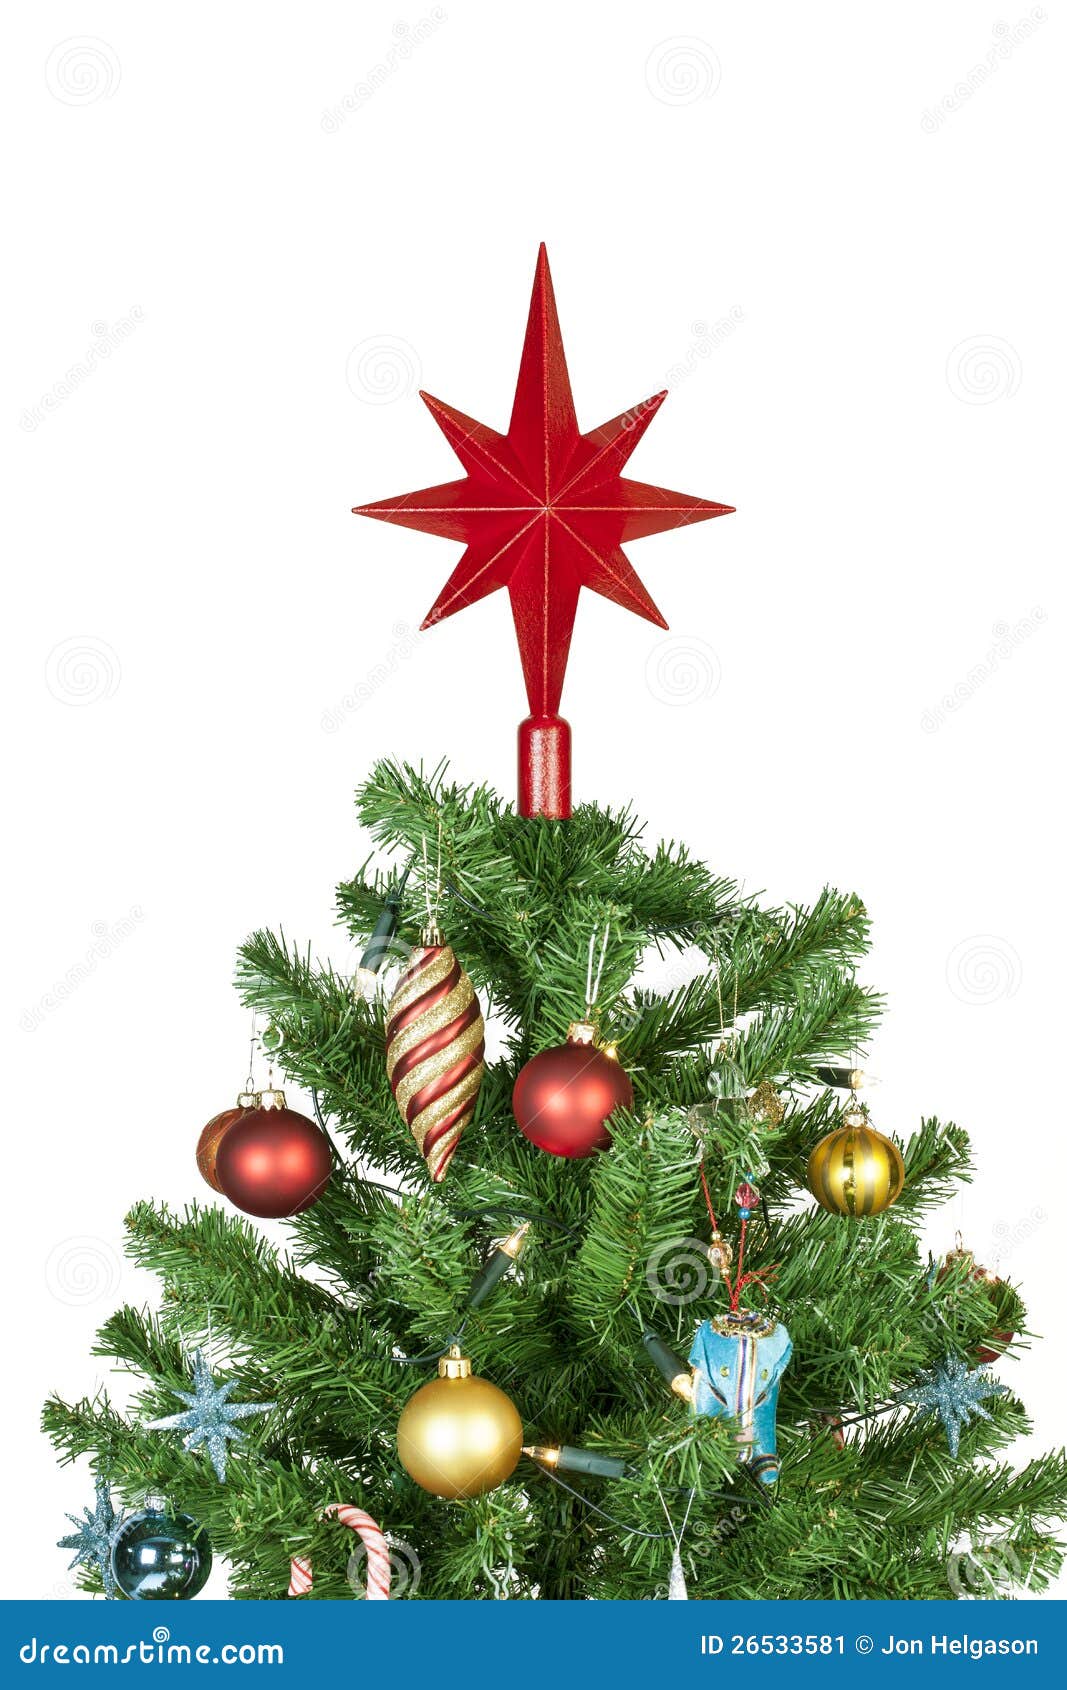 Christmas Tree Top With Ornaments Stock Image - Image: 26533581